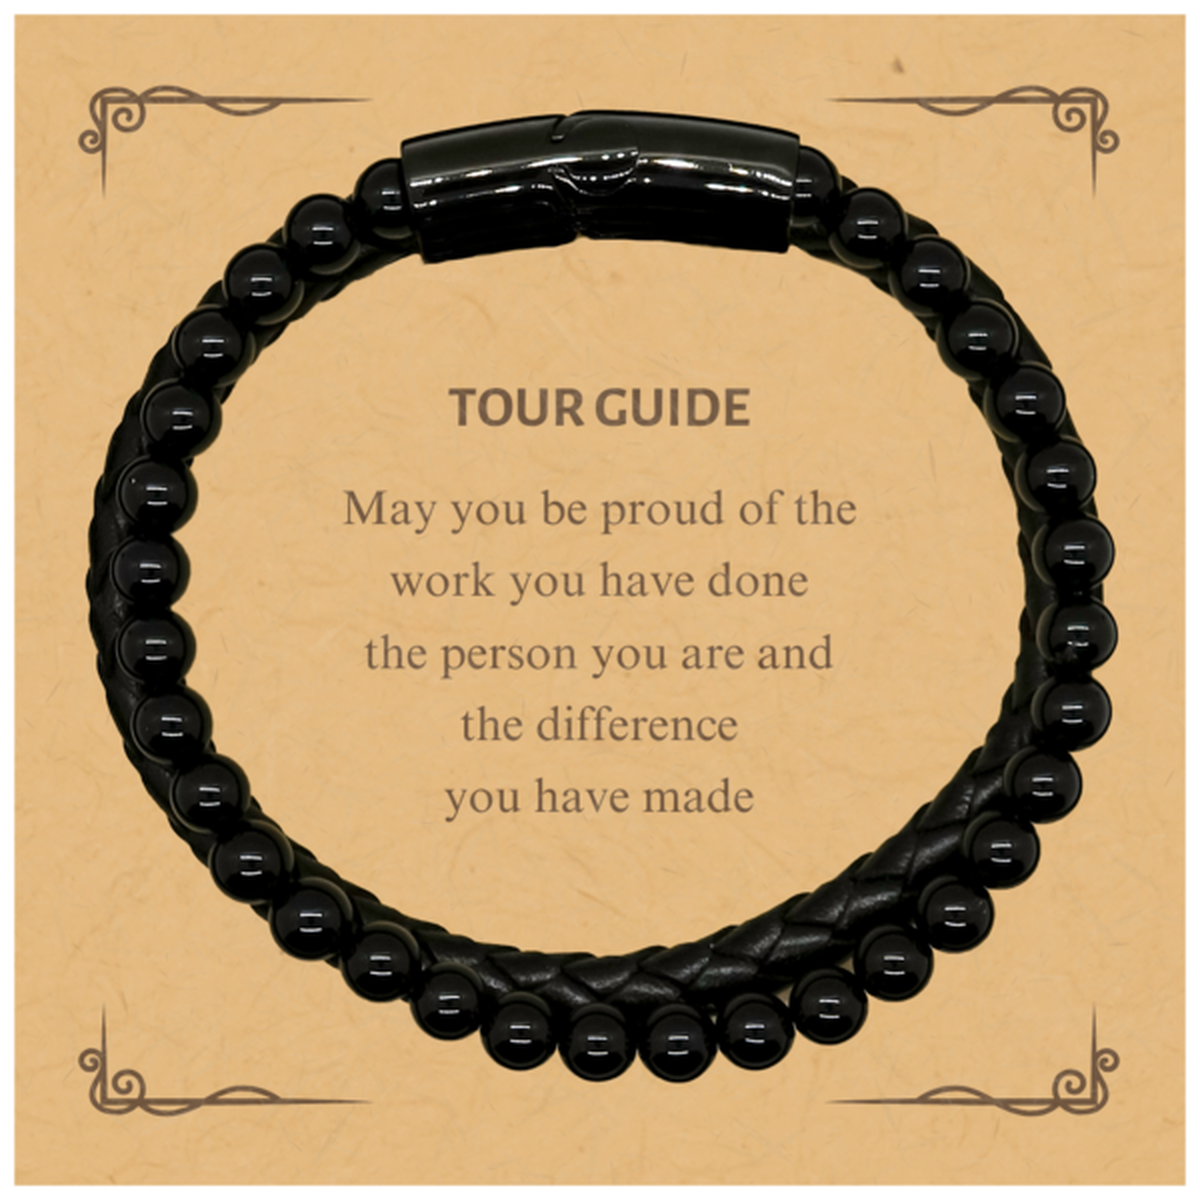 Tour Guide May you be proud of the work you have done, Retirement Tour Guide Stone Leather Bracelets for Colleague Appreciation Gifts Amazing for Tour Guide